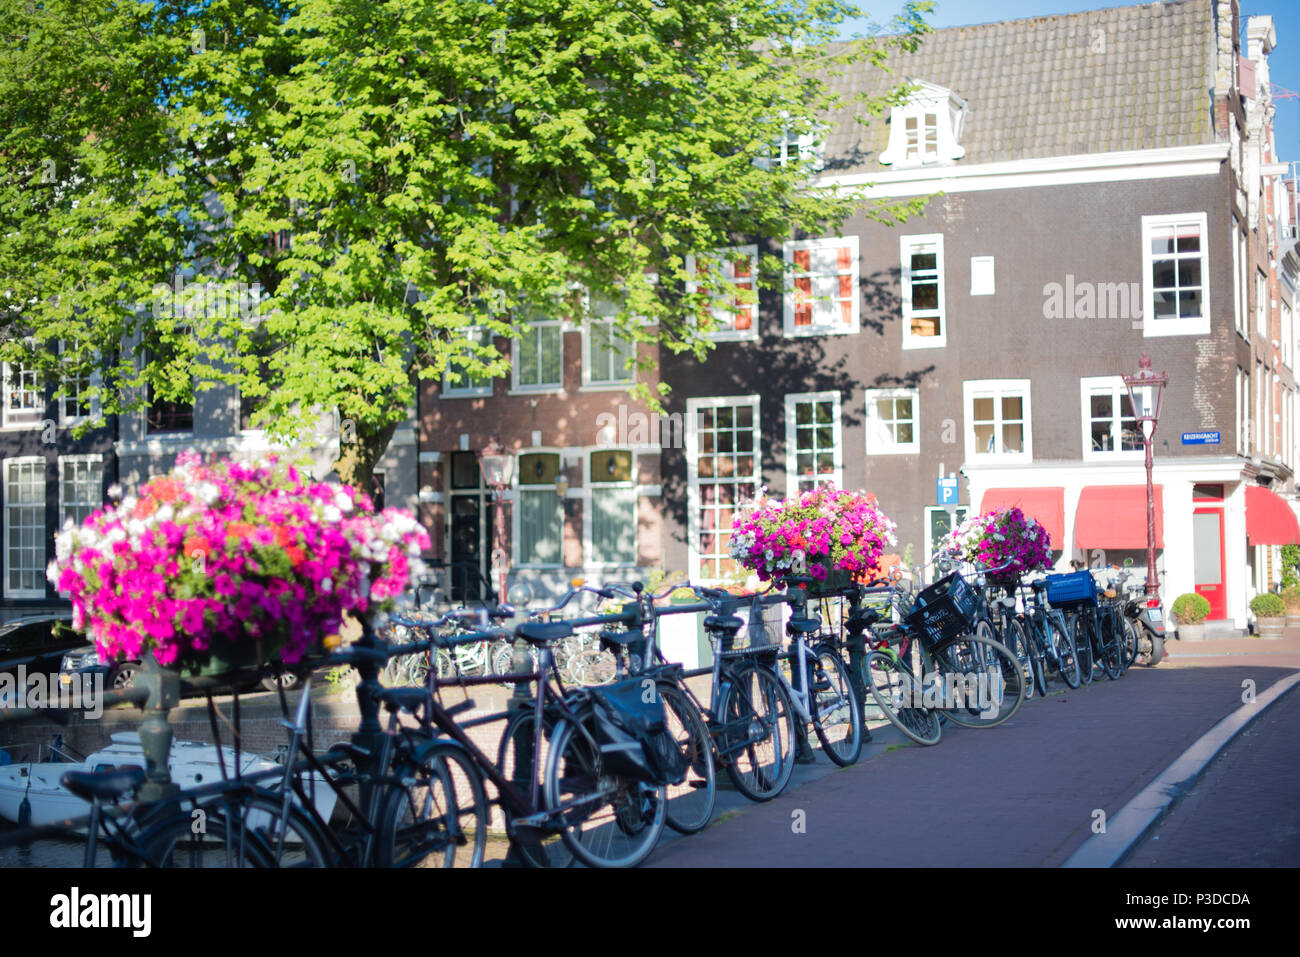 Pretty display of flowers along with all the parked bikes on a bridge over the canal in Amsterdam Stock Photo